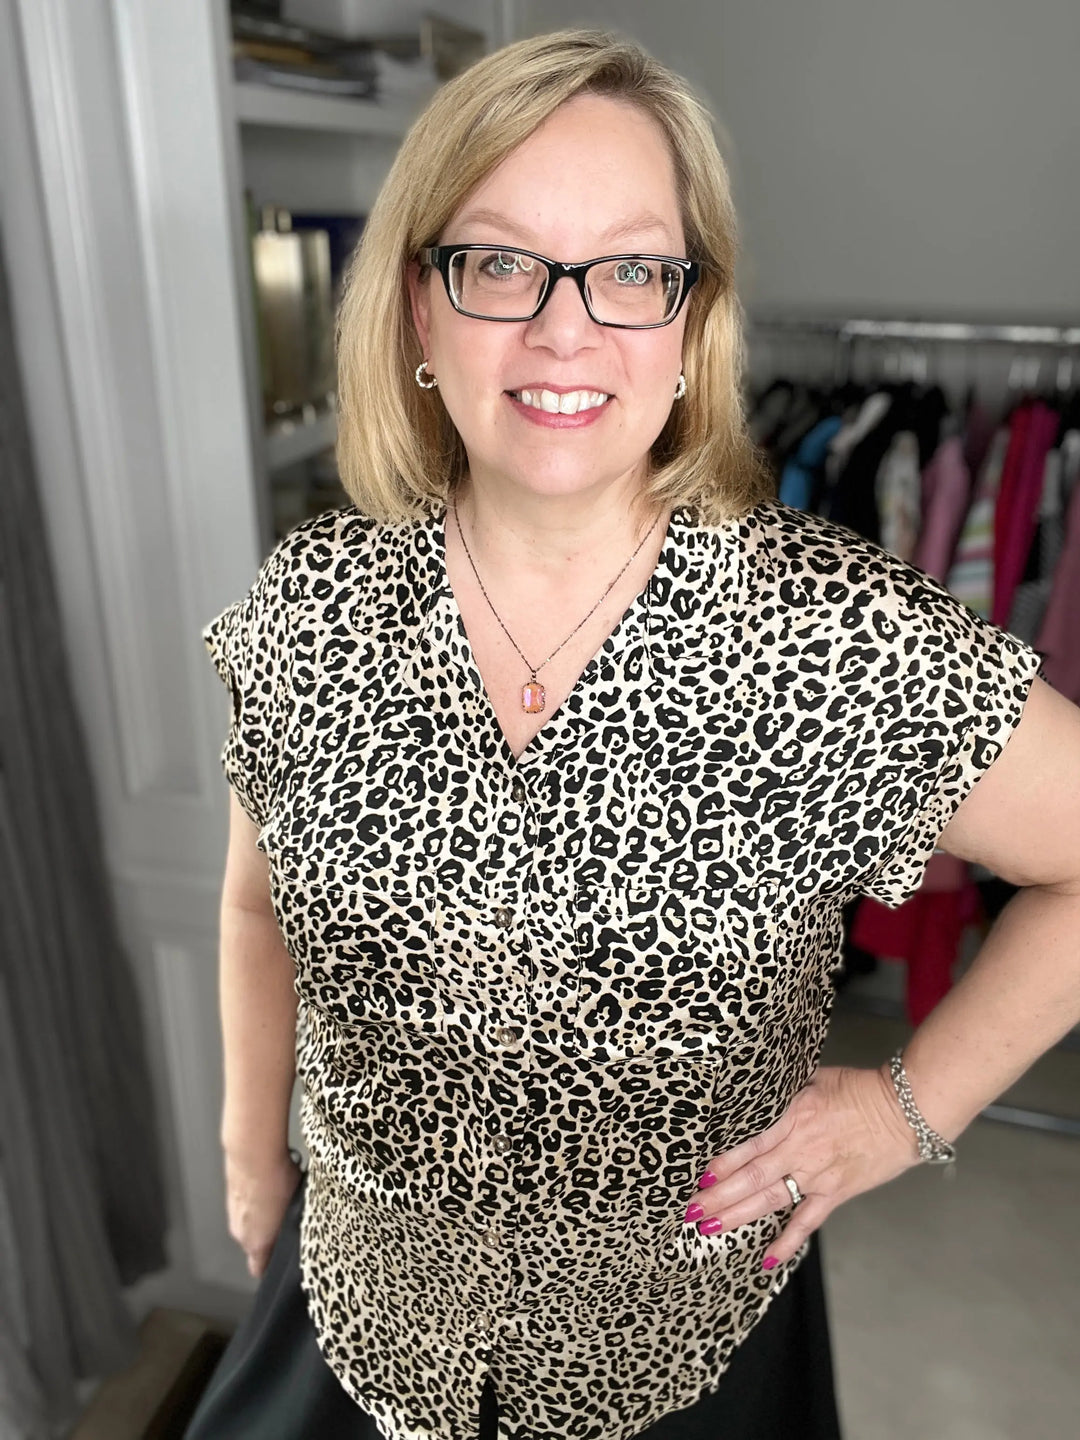 Short-Sleeve Animal Print Blouse-Styled by Steph-Styled by Steph-Women's Fashion Clothing Boutique, Indiana